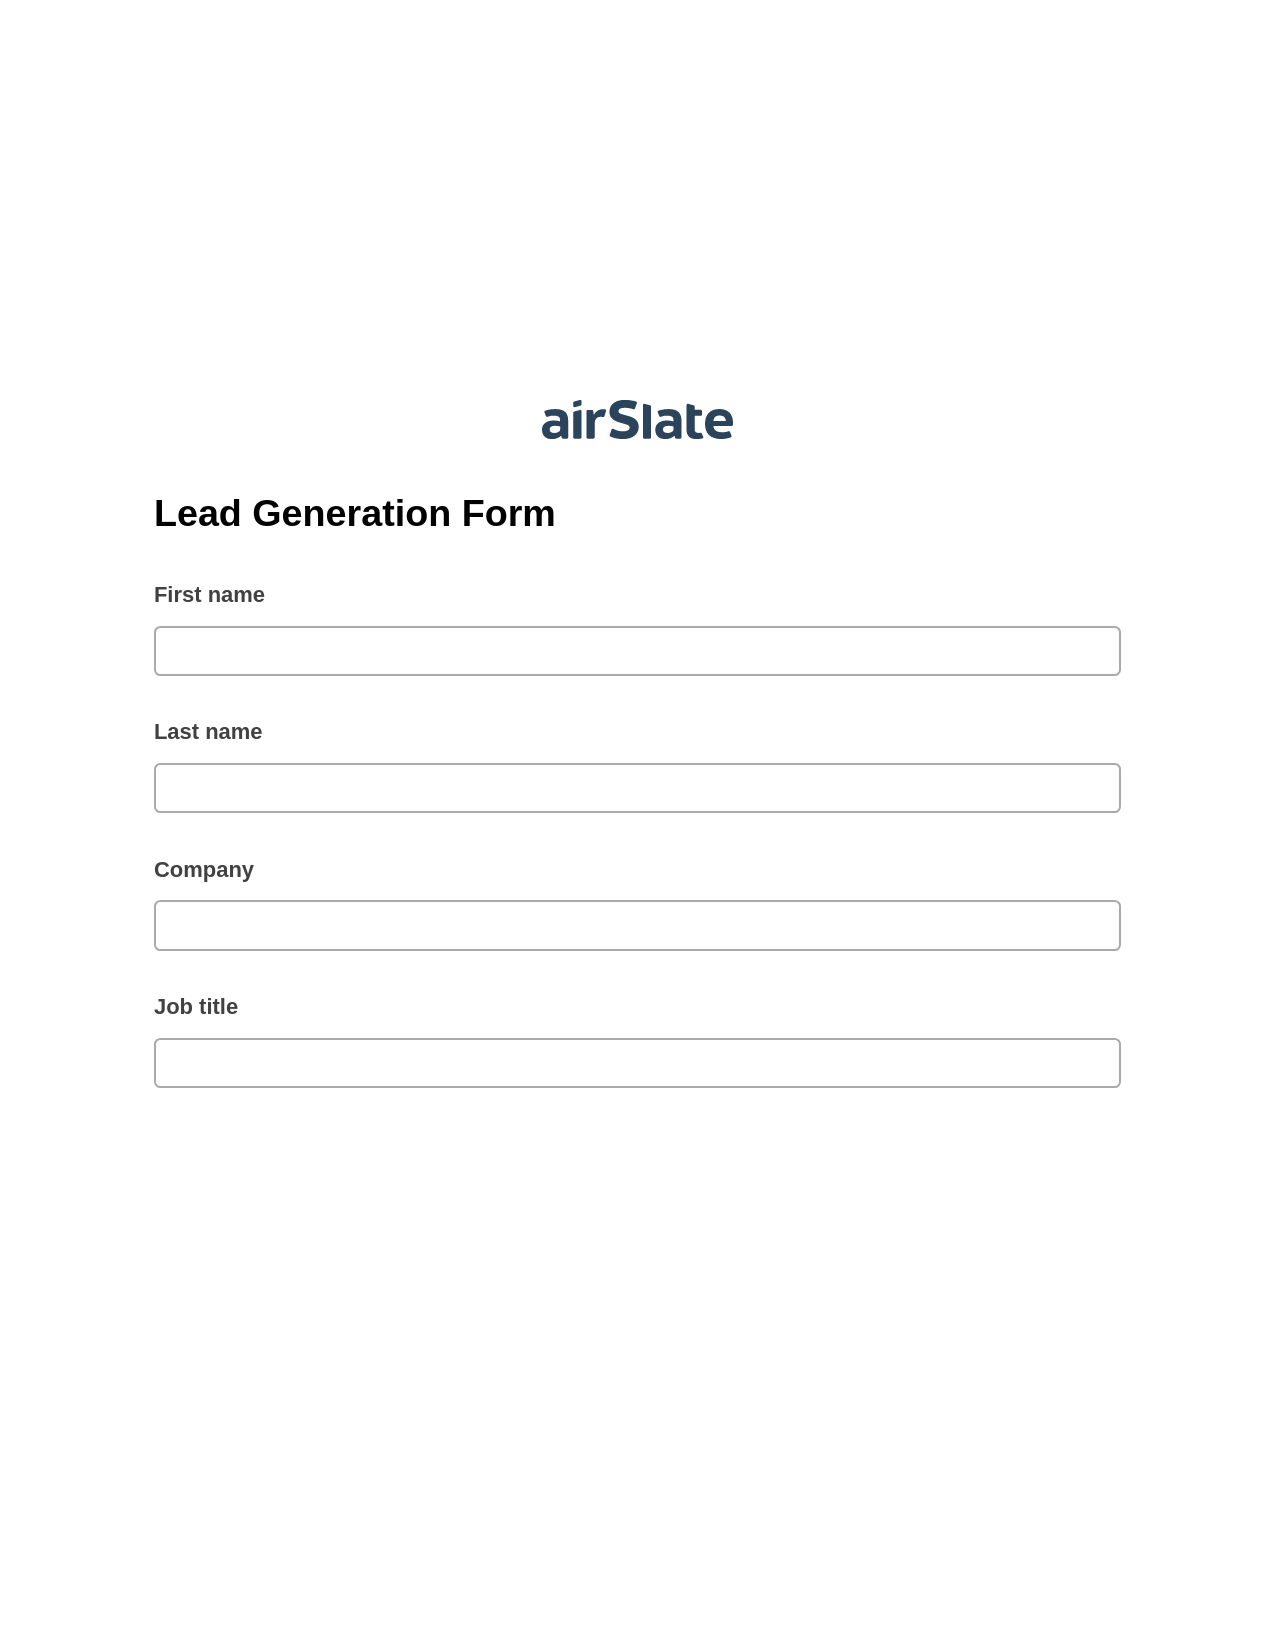 Lead Generation Form Prefill from NetSuite records, Add Tags to Slate Bot, Archive to SharePoint Folder Bot